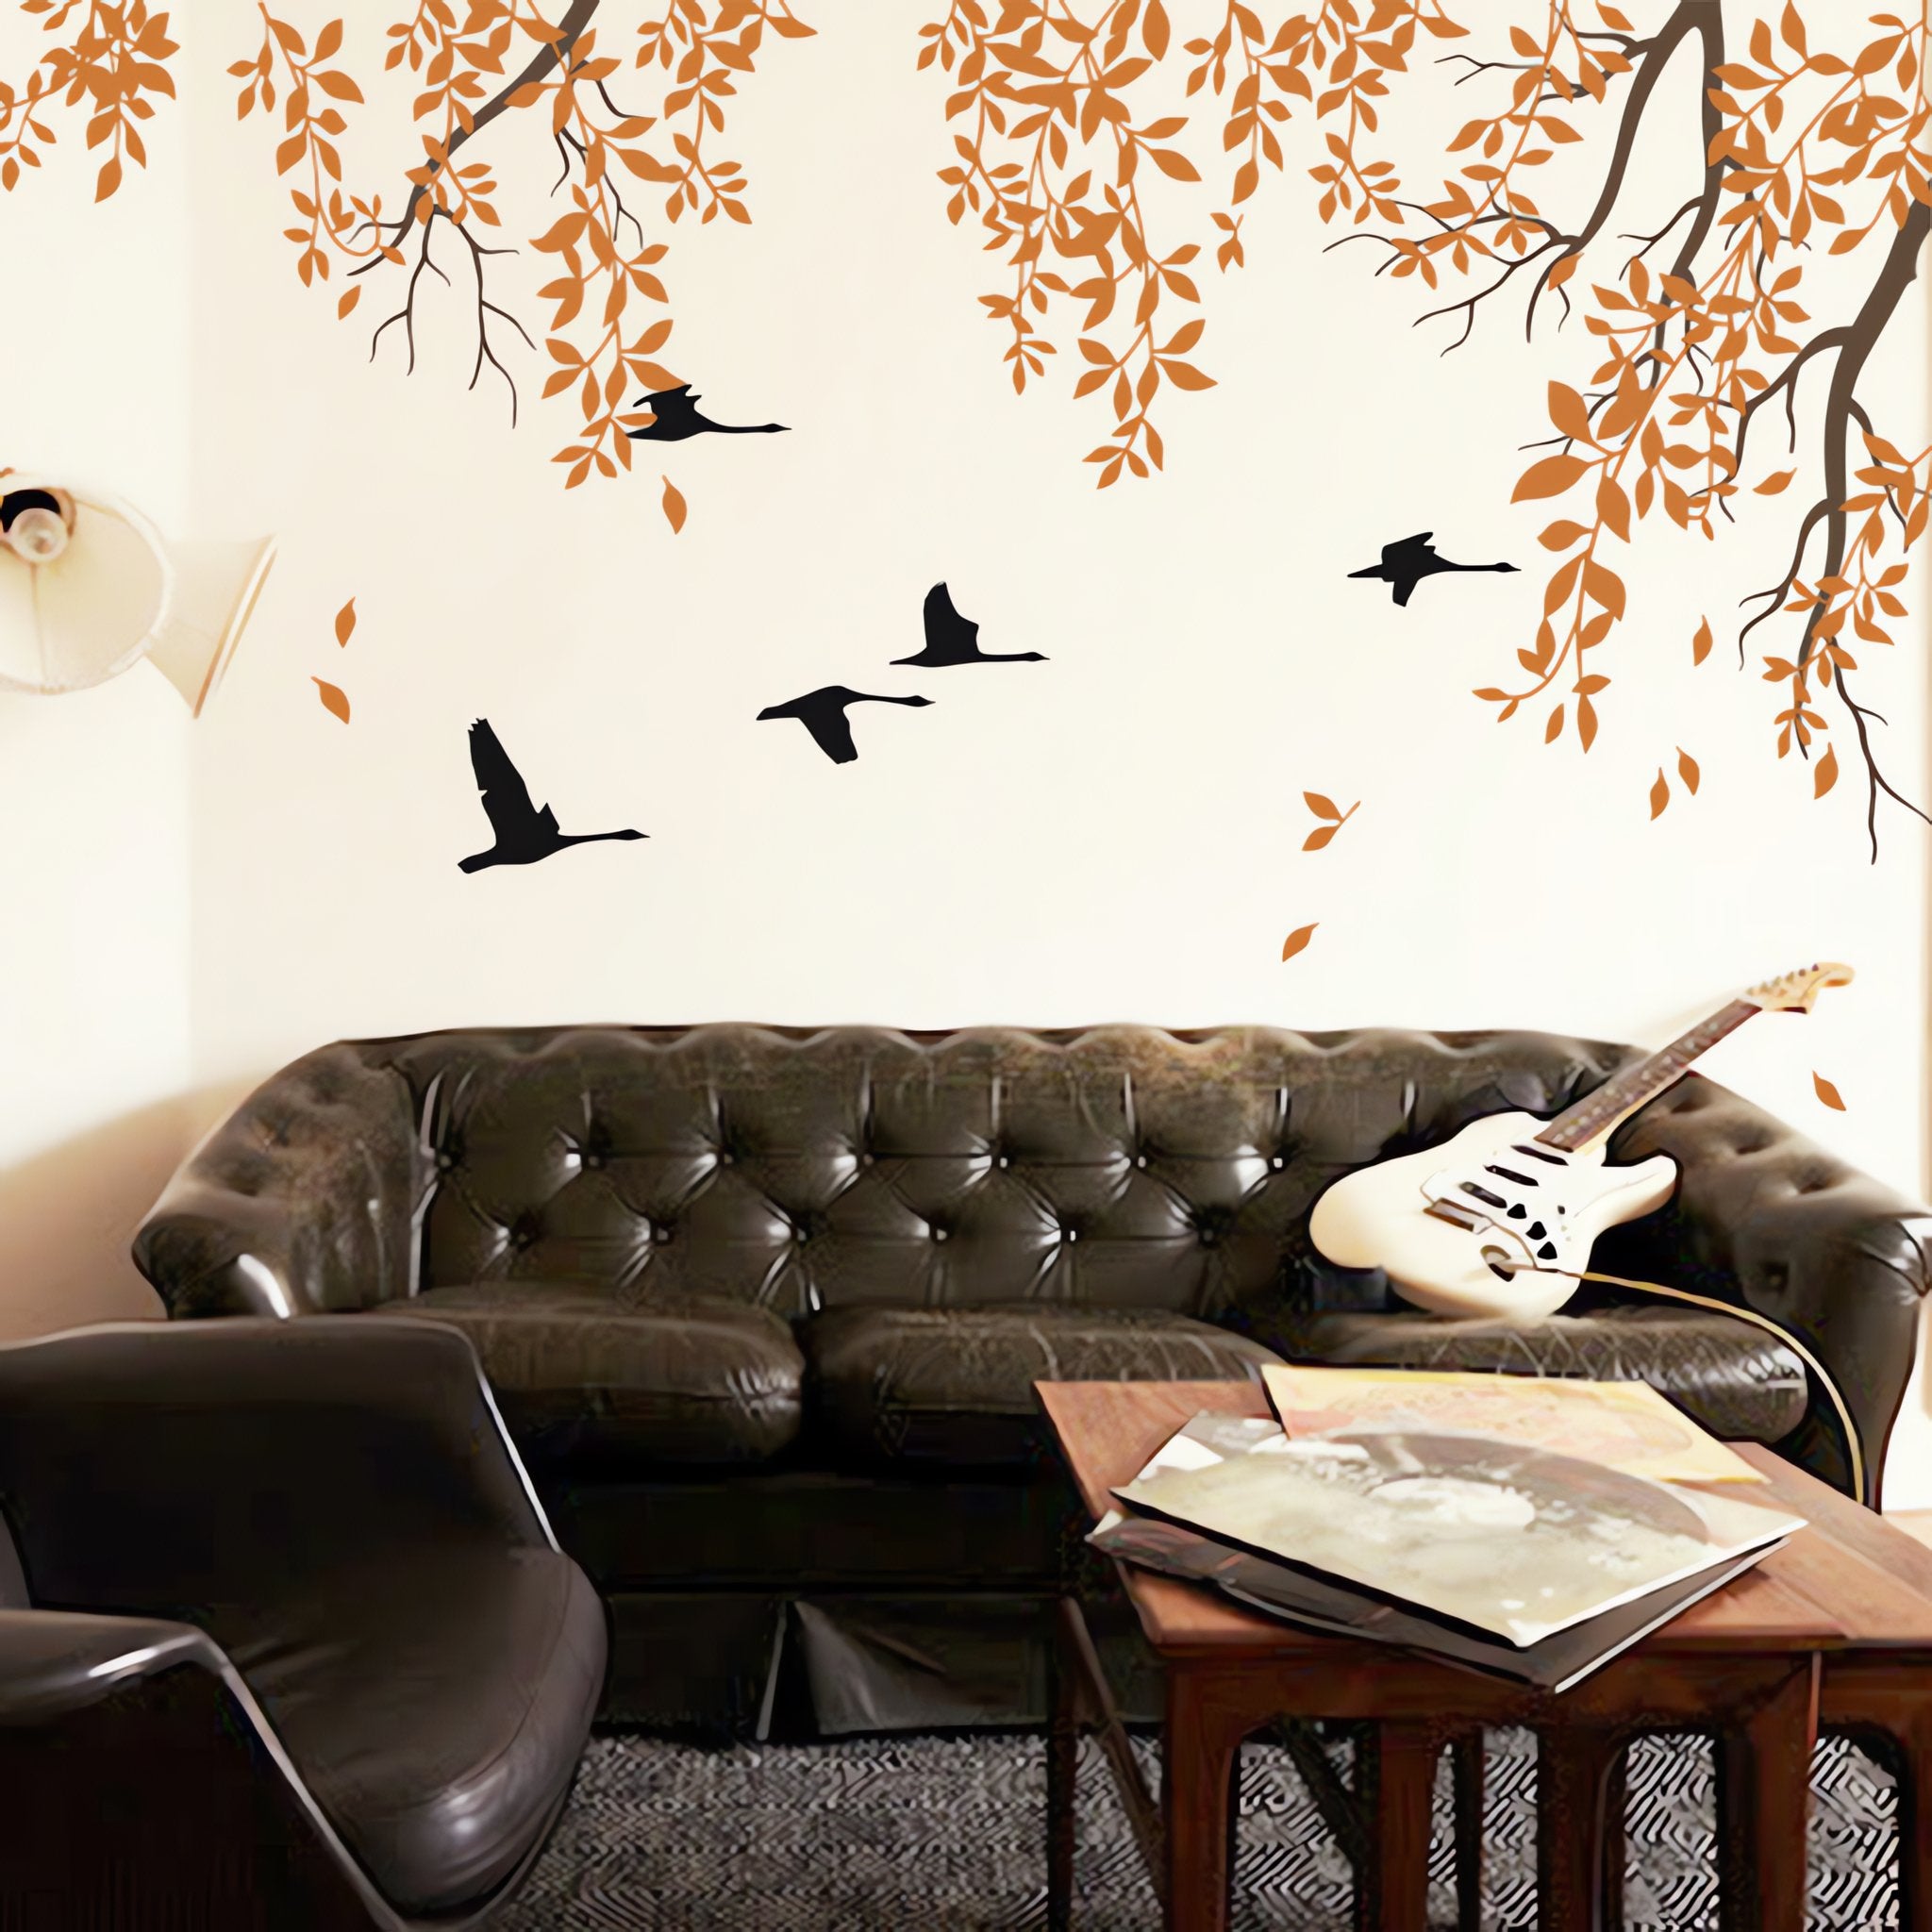 Stylish tree wall sticker with hanging branches and birds flying in a living room with a leather couch and coffee table.